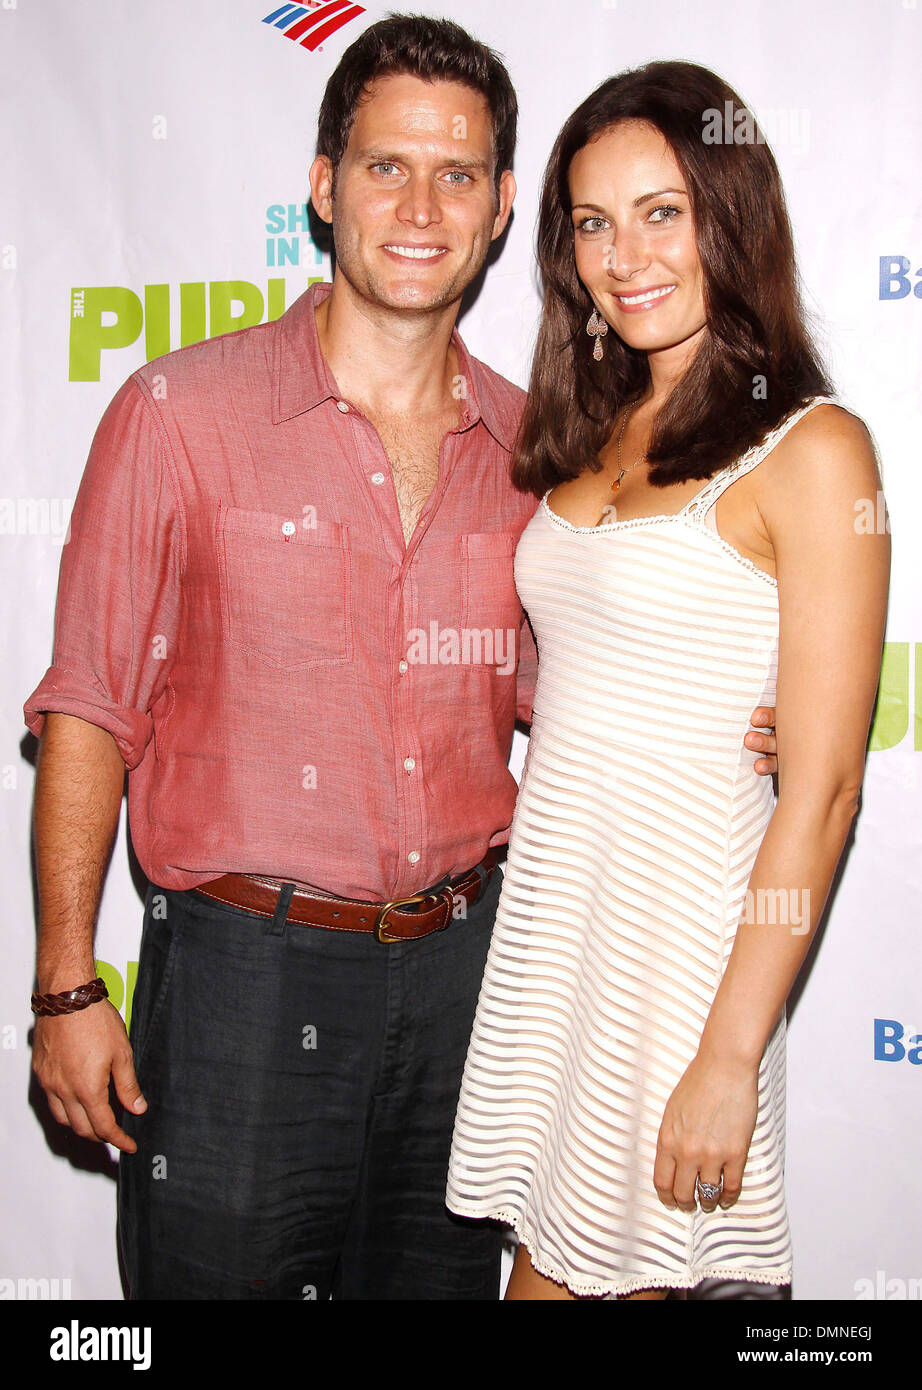 Steven Pasquale and Laura Benanti Opening night of Public Theater production of 'Into Woods' at Delacorte Theater - Arrivals Stock Photo